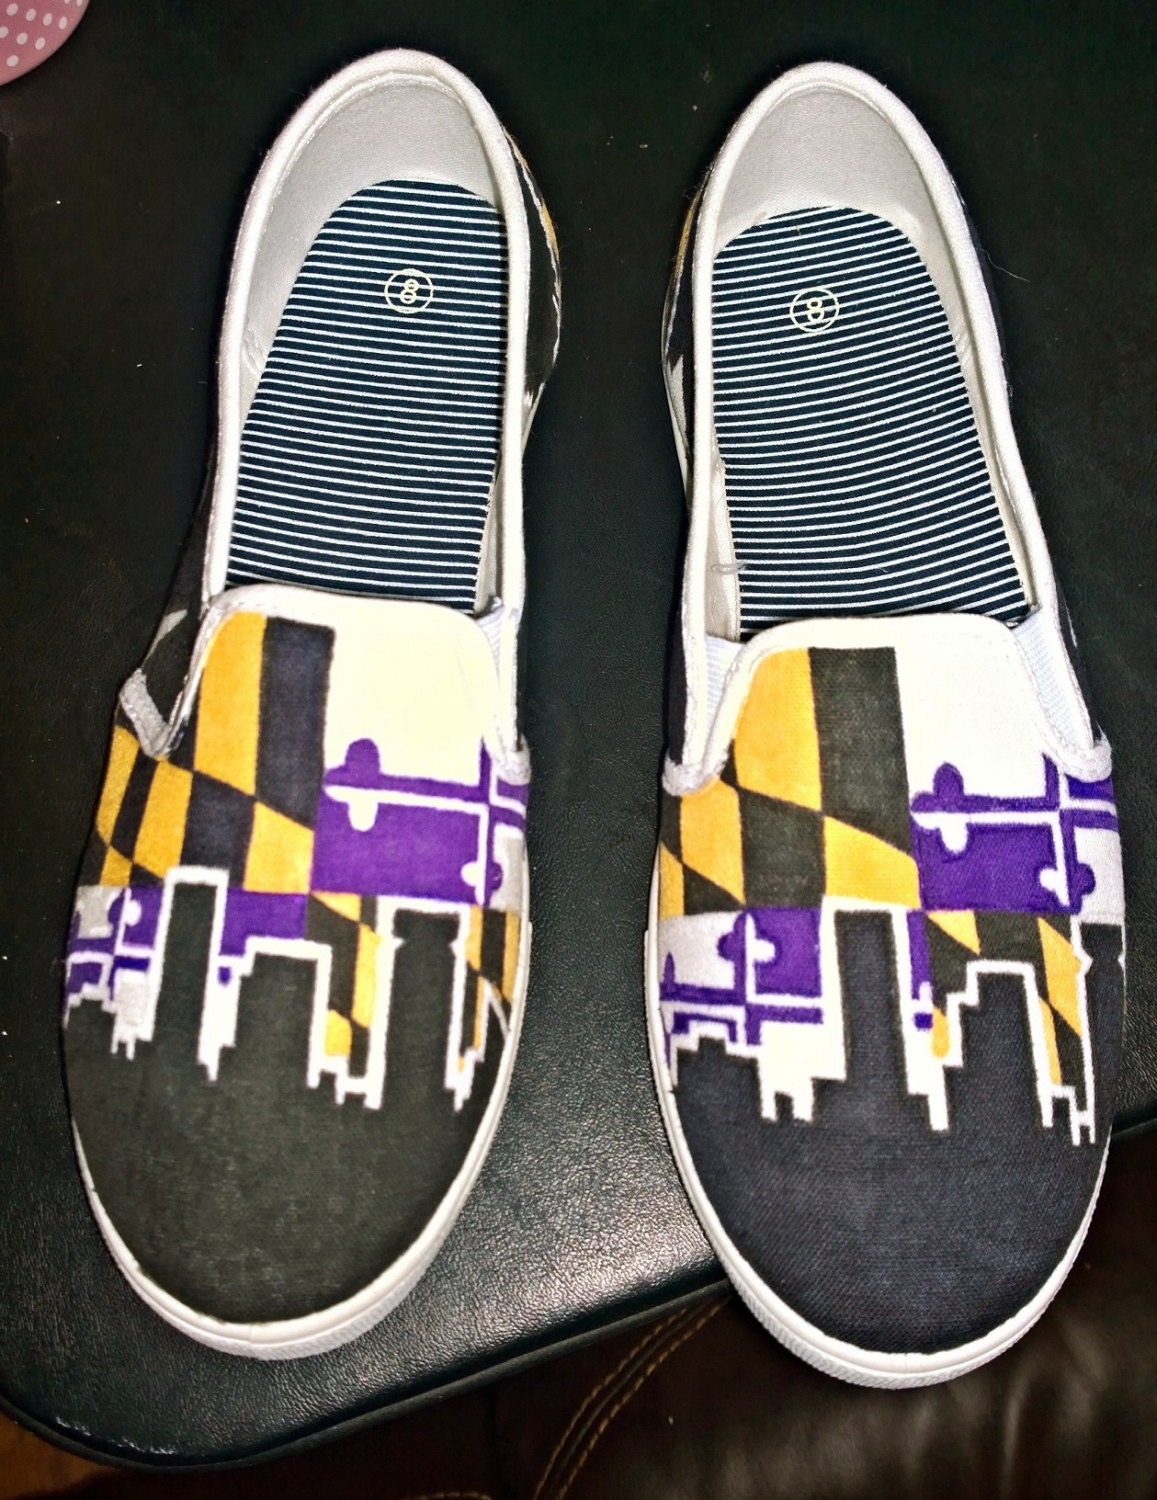 Maryland Shoes Purple Edition by ABRODesigns on Etsy